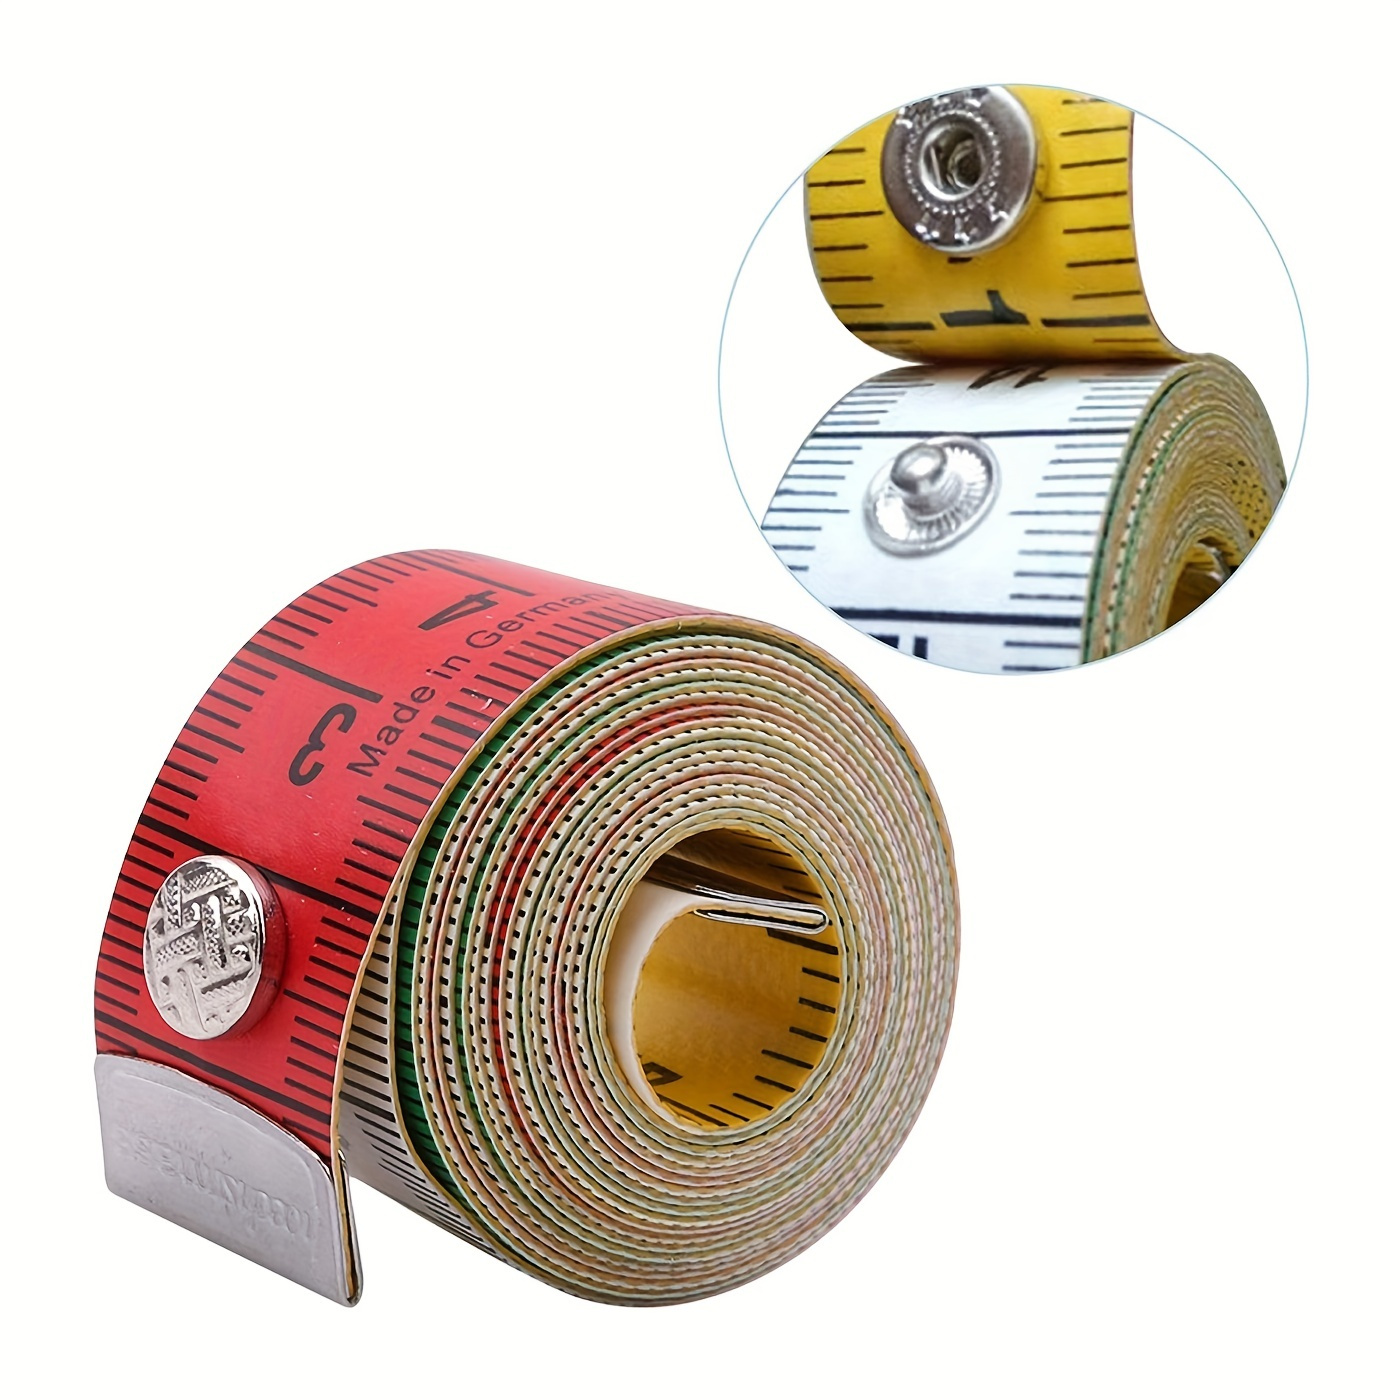 

1pc 60-inch Tape Measure, Body Measuring Tape, Sewing Tailor Tape, Mini Measuring Soft Flat Ruler, Sewing Tape Measure, With Buckle For Easy Storage